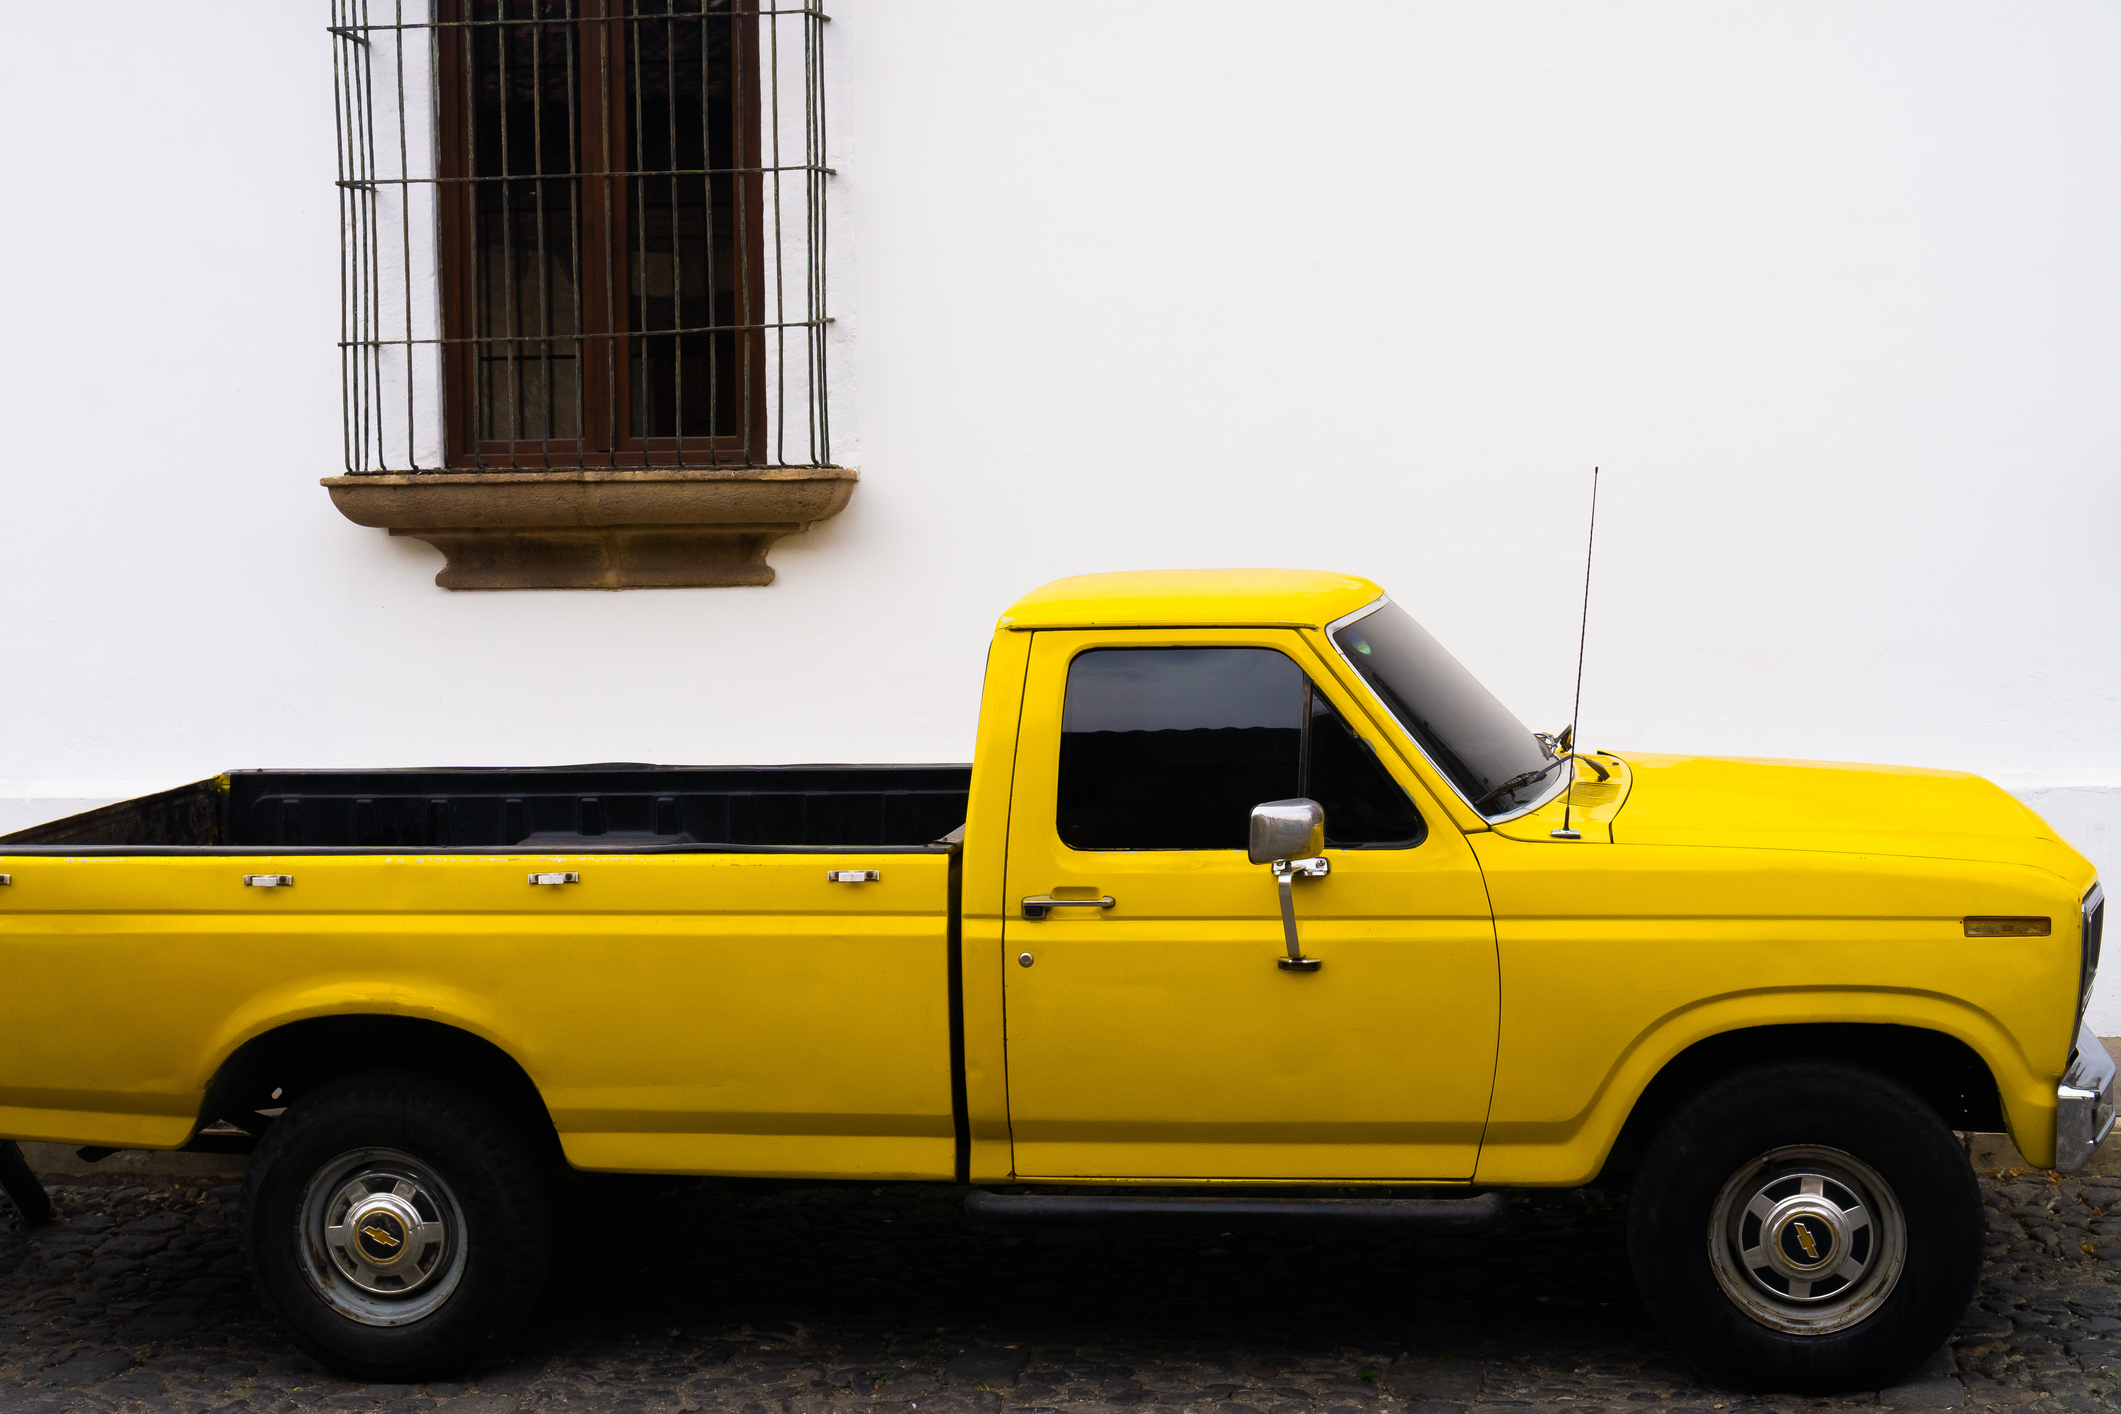 A yellow pickup truck is parked on a cobblestone street next to a white wall with a window